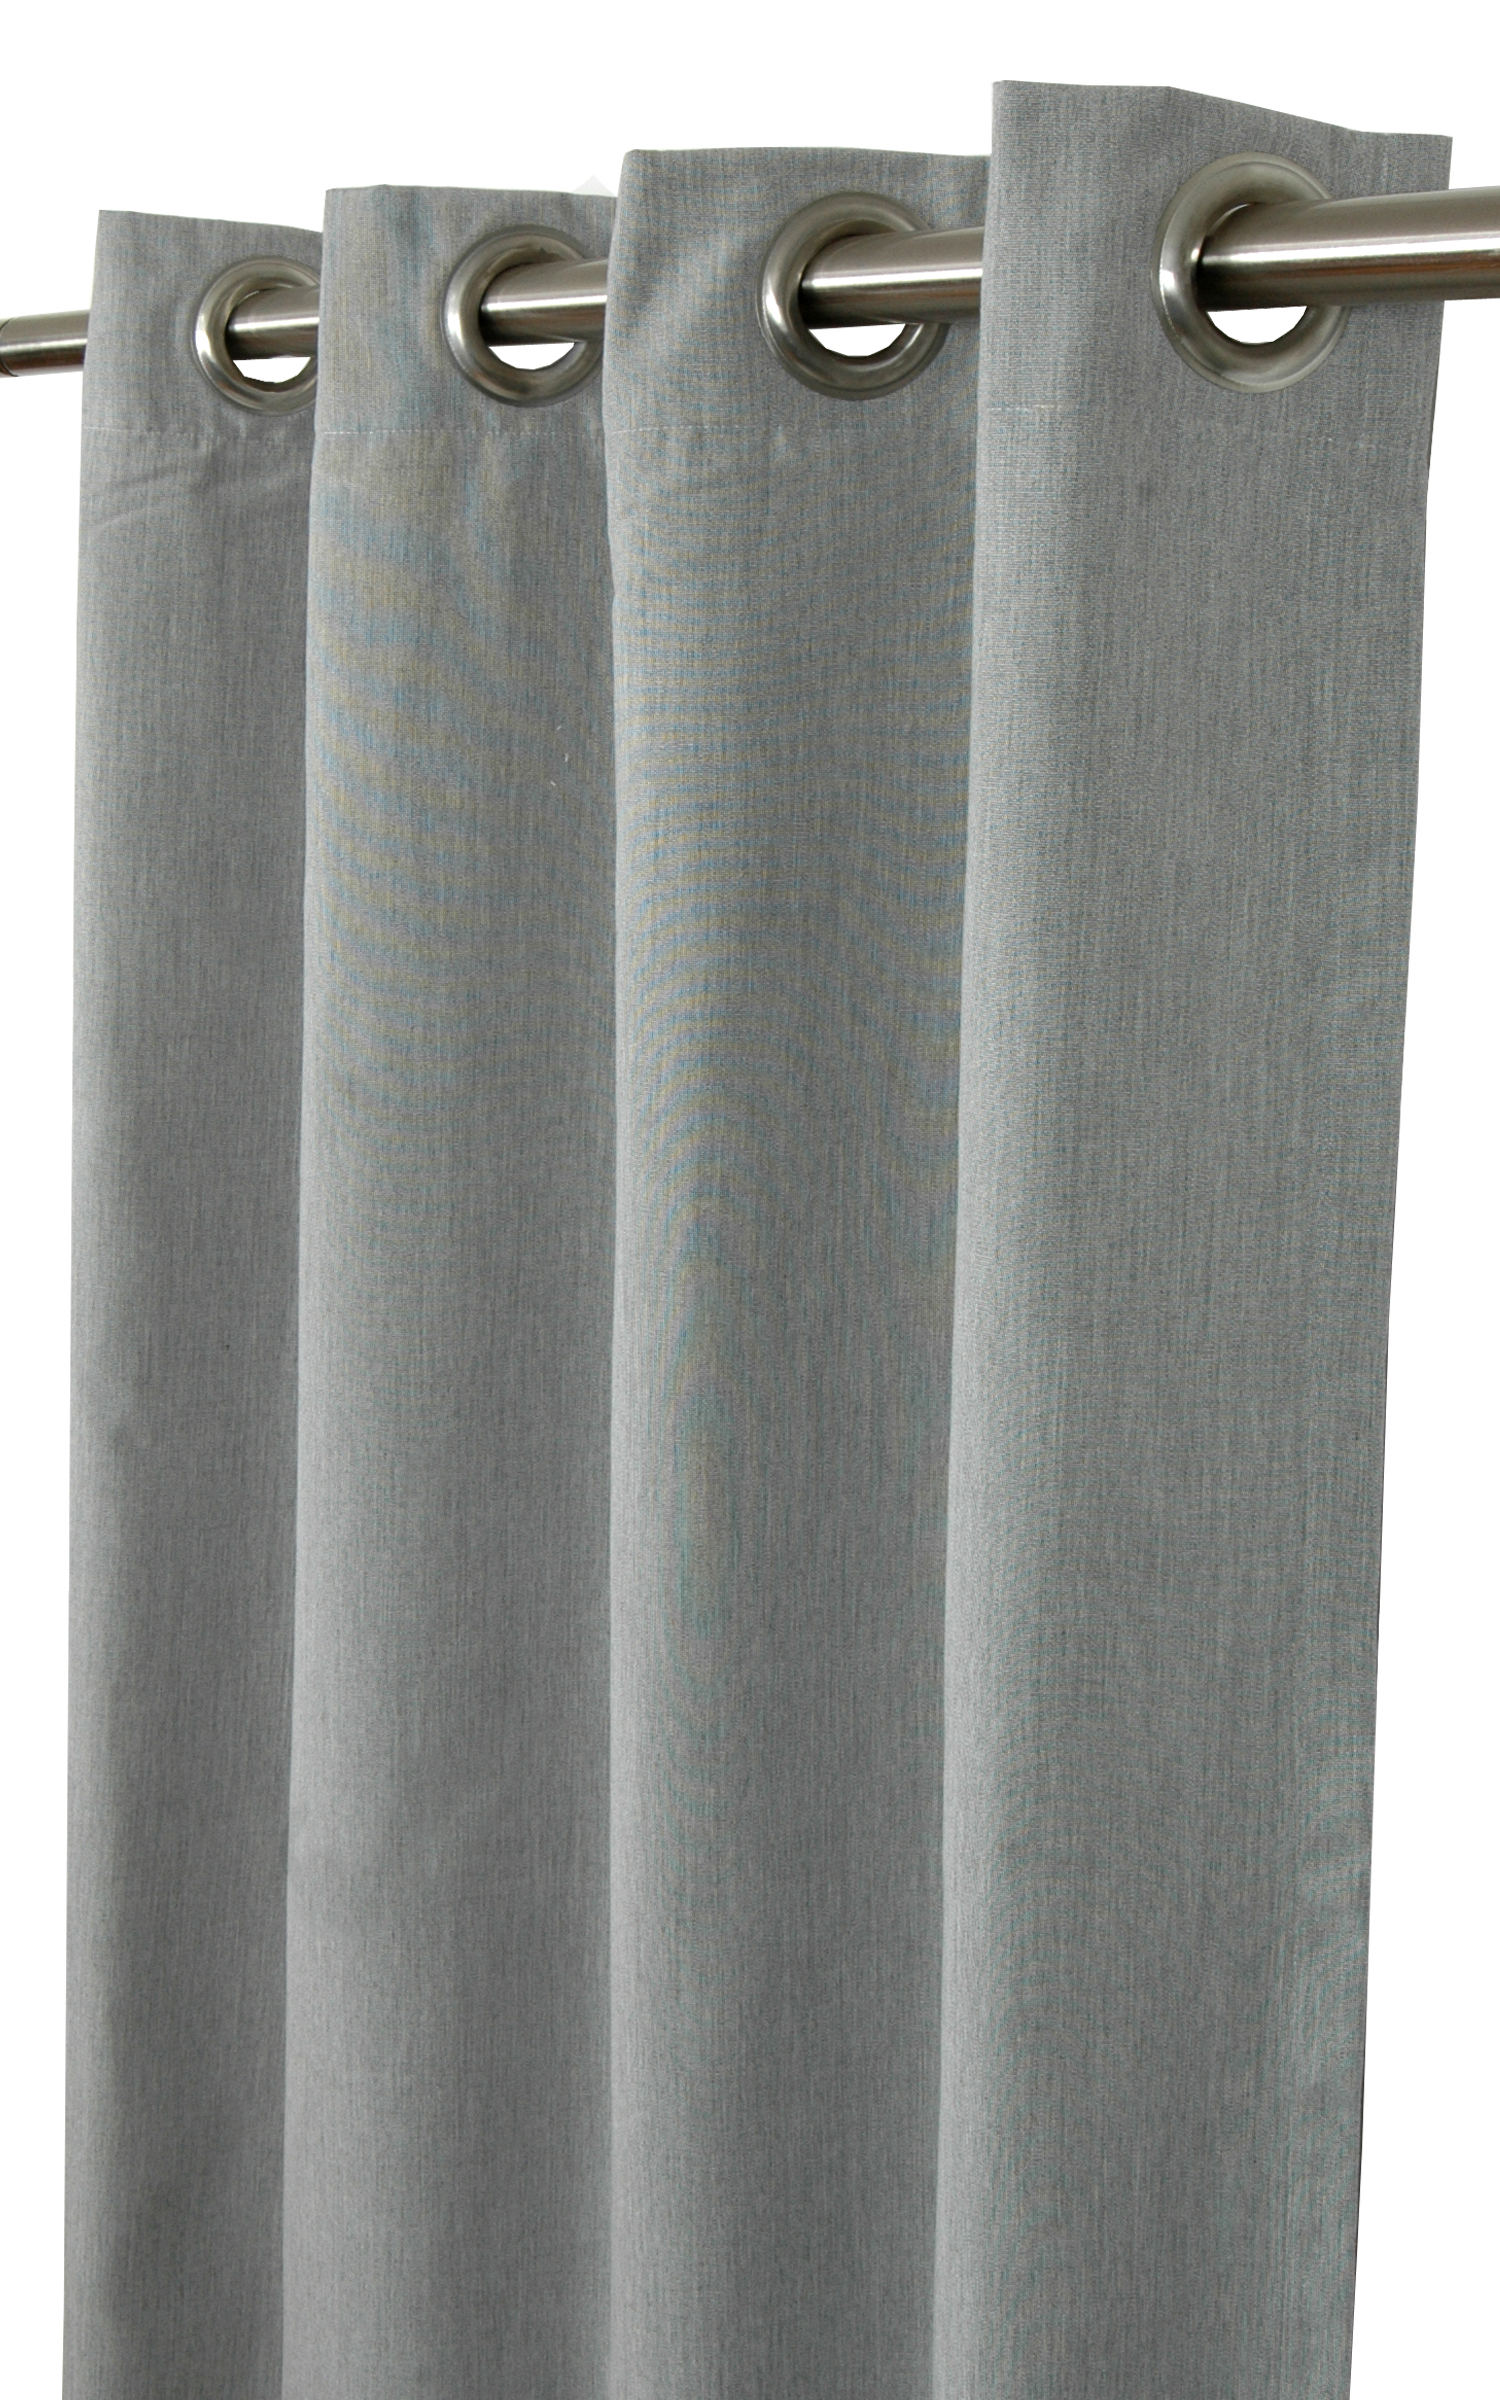 Sunbrella Canvas Granite Indoor/Outdoor Curtain Panel by Sweet Summer Living, 50" x 120" with Stainless Steel Grommets - image 1 of 1